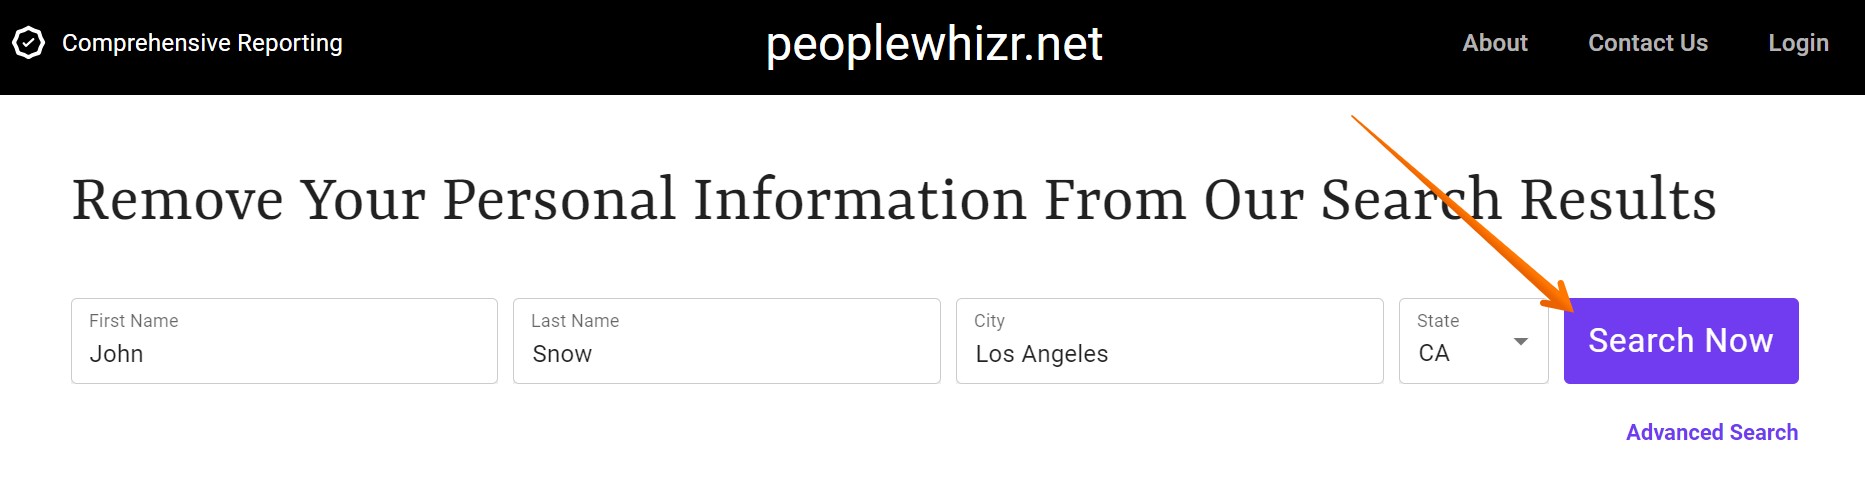 Enter your first name, last name, and city, and select your state from the dropdown menu